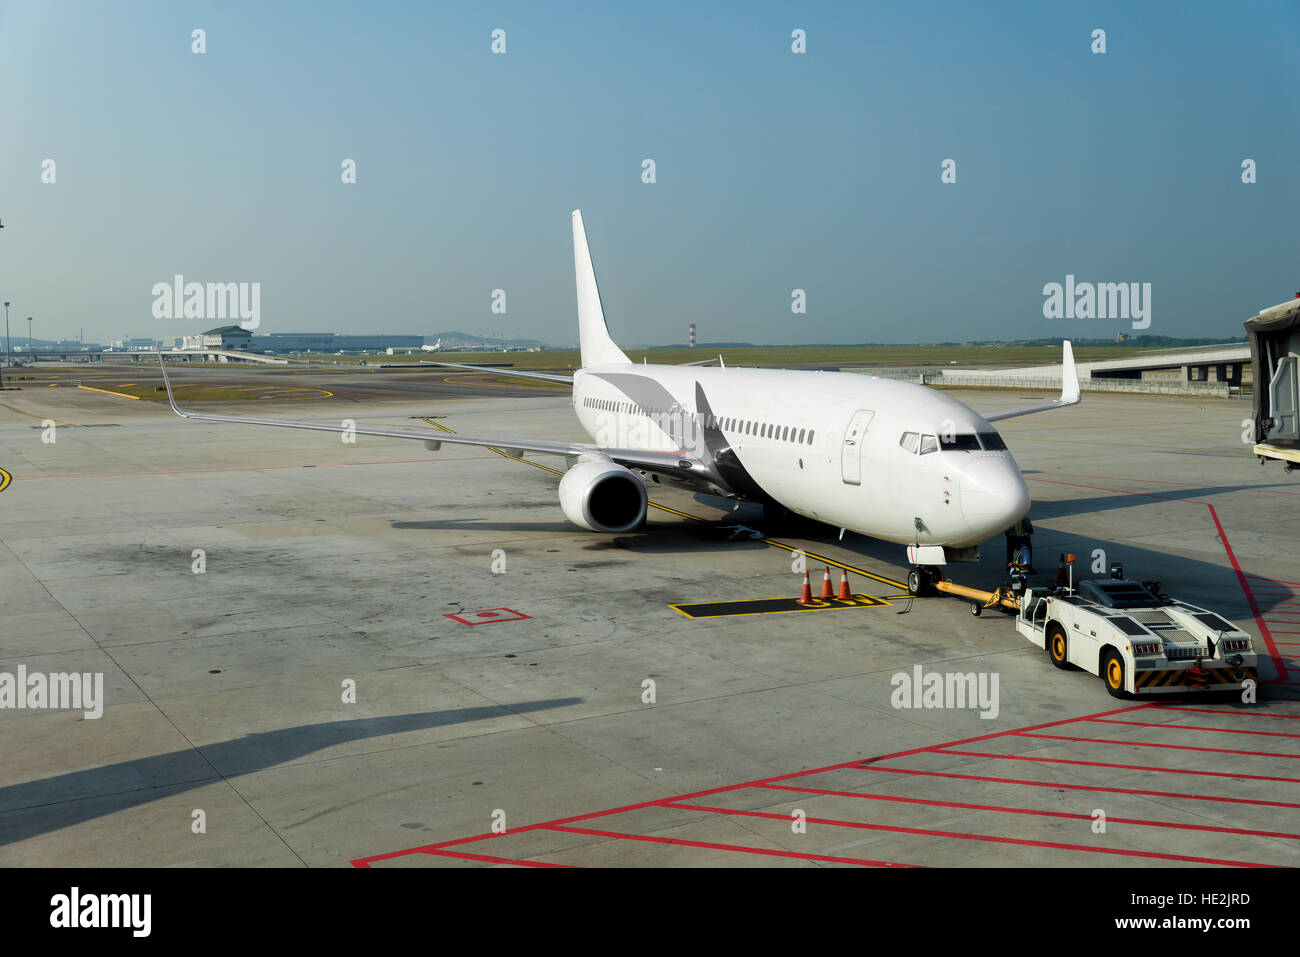 Airplane at the terminal gate ready for takeoff in modern international airport. Stock Photo